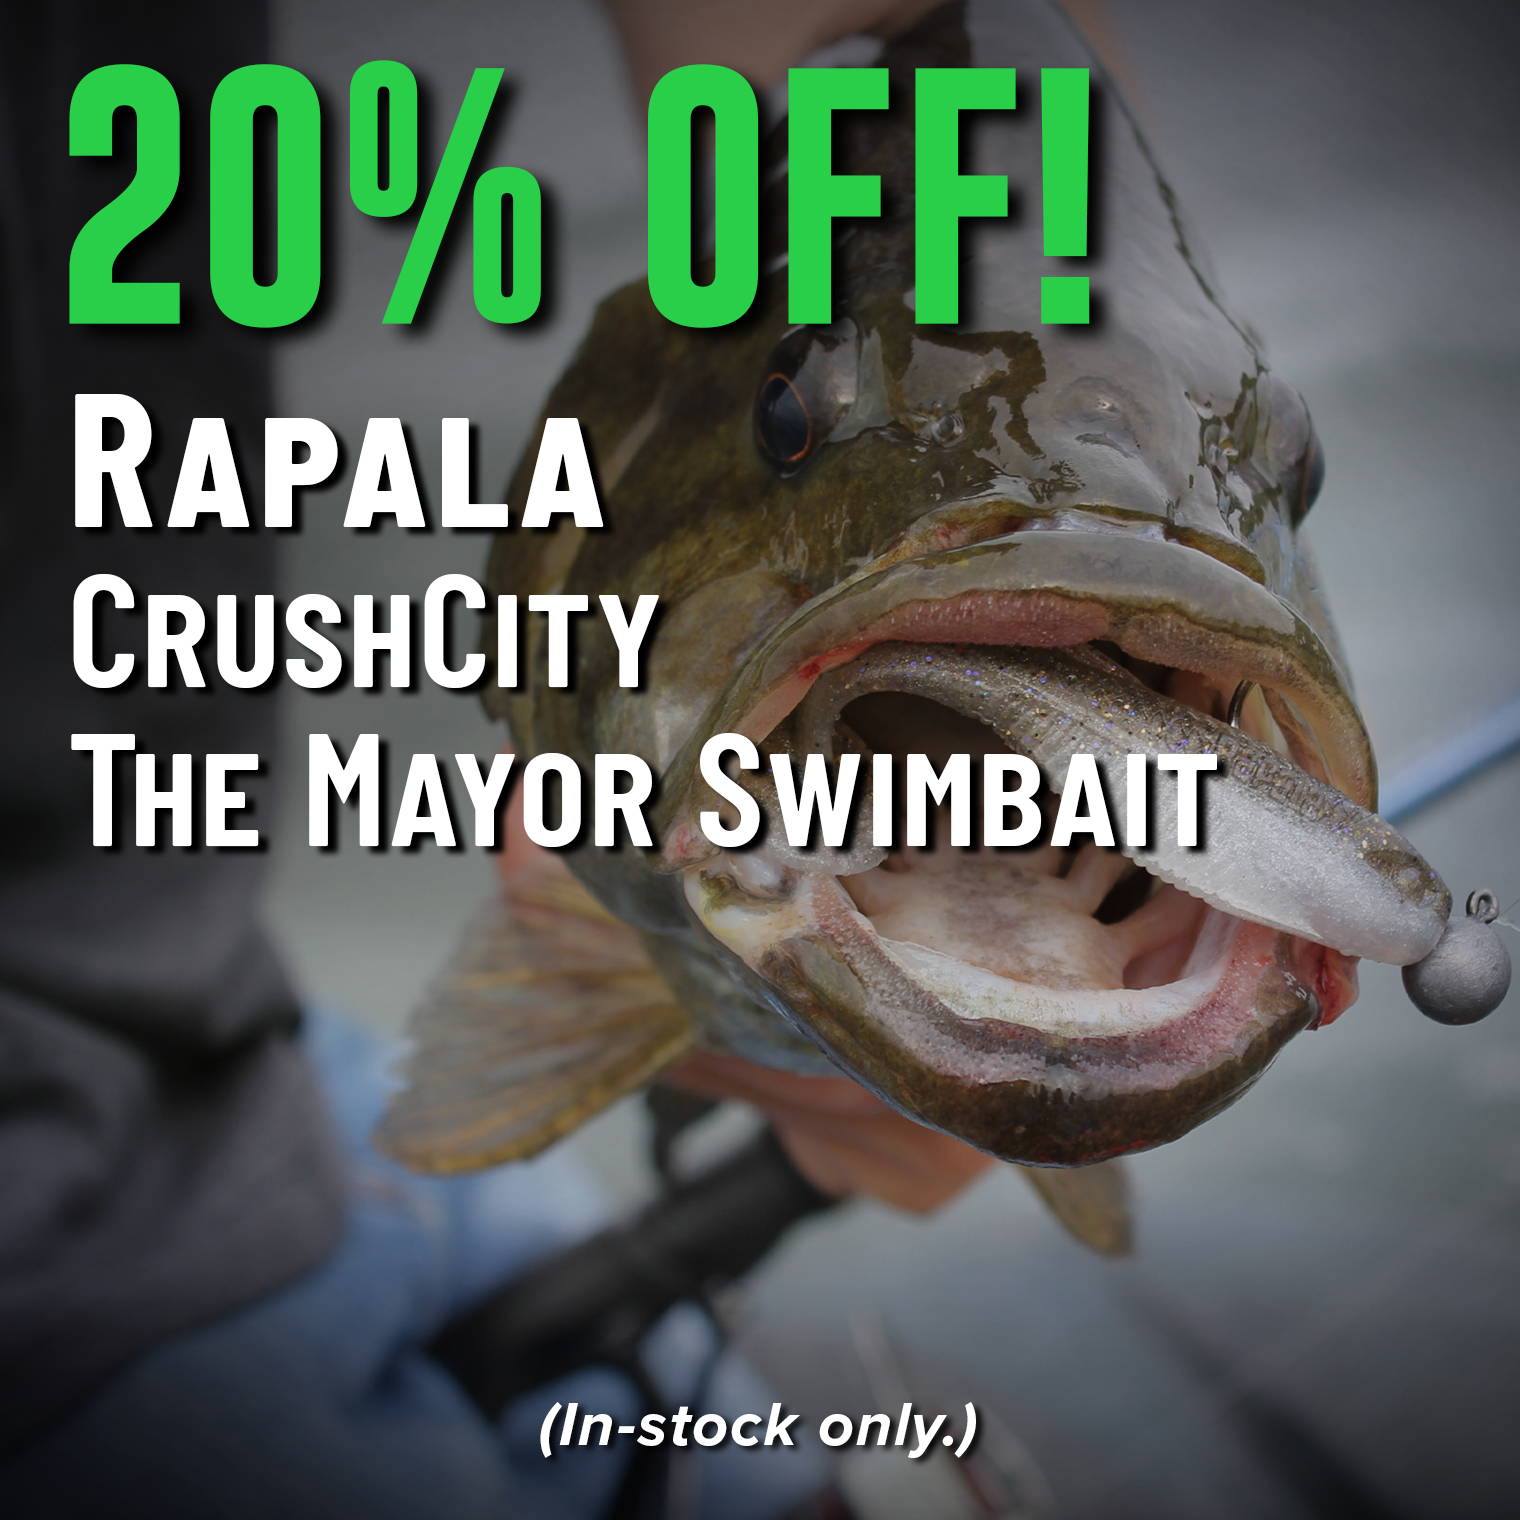 20% Off! Rapala CrushCity The Mayor Swimbait (In-stock only.)